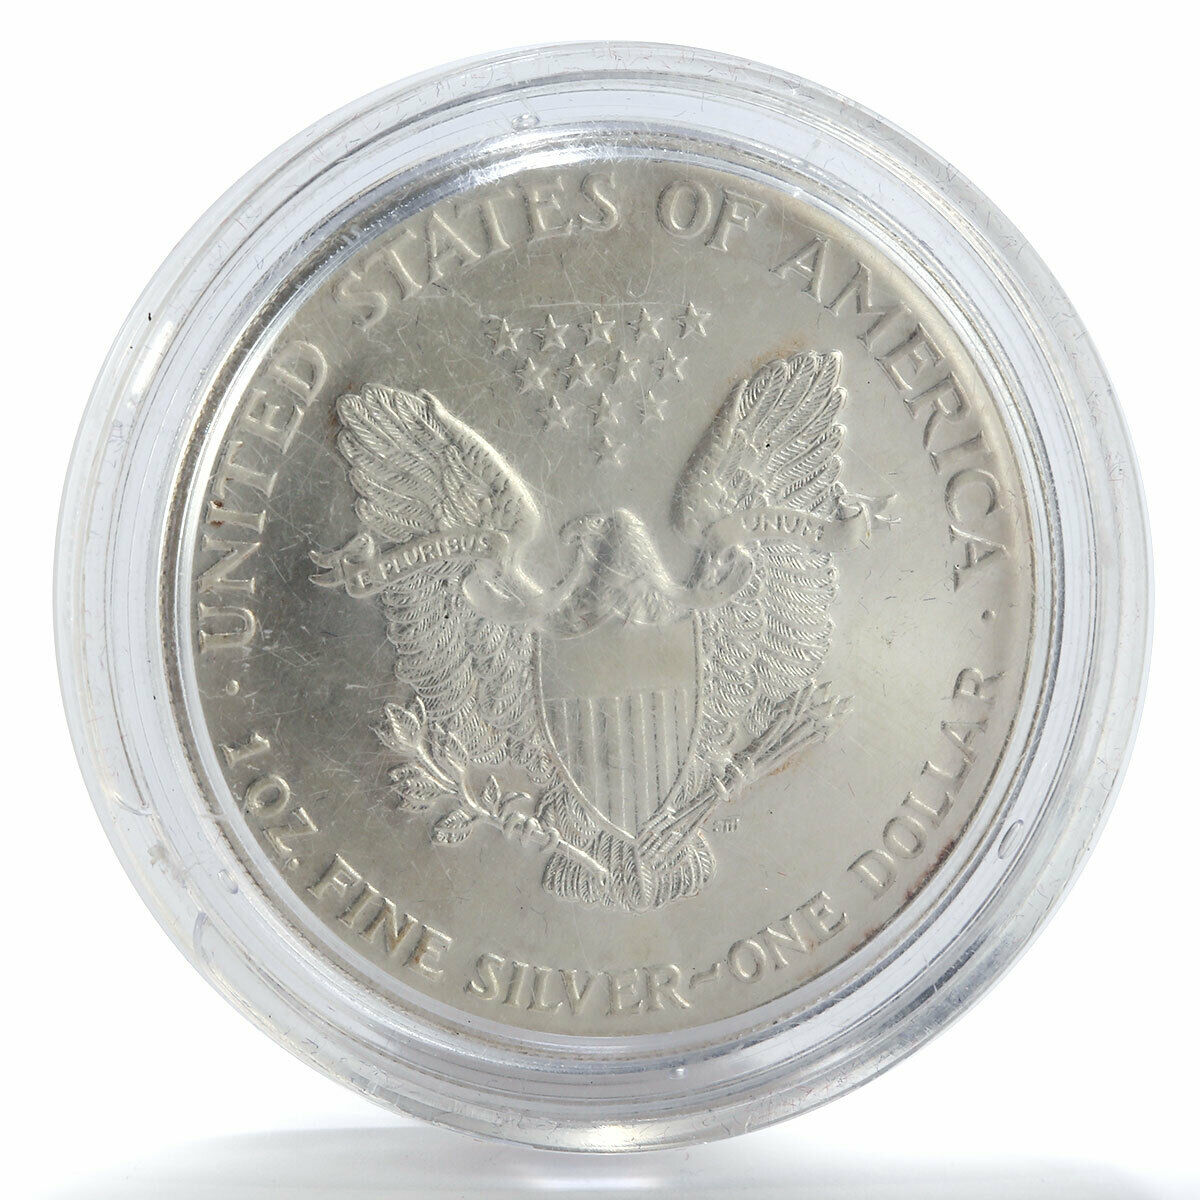 United States 1 dollar God Bless America colorized silver coin 2001